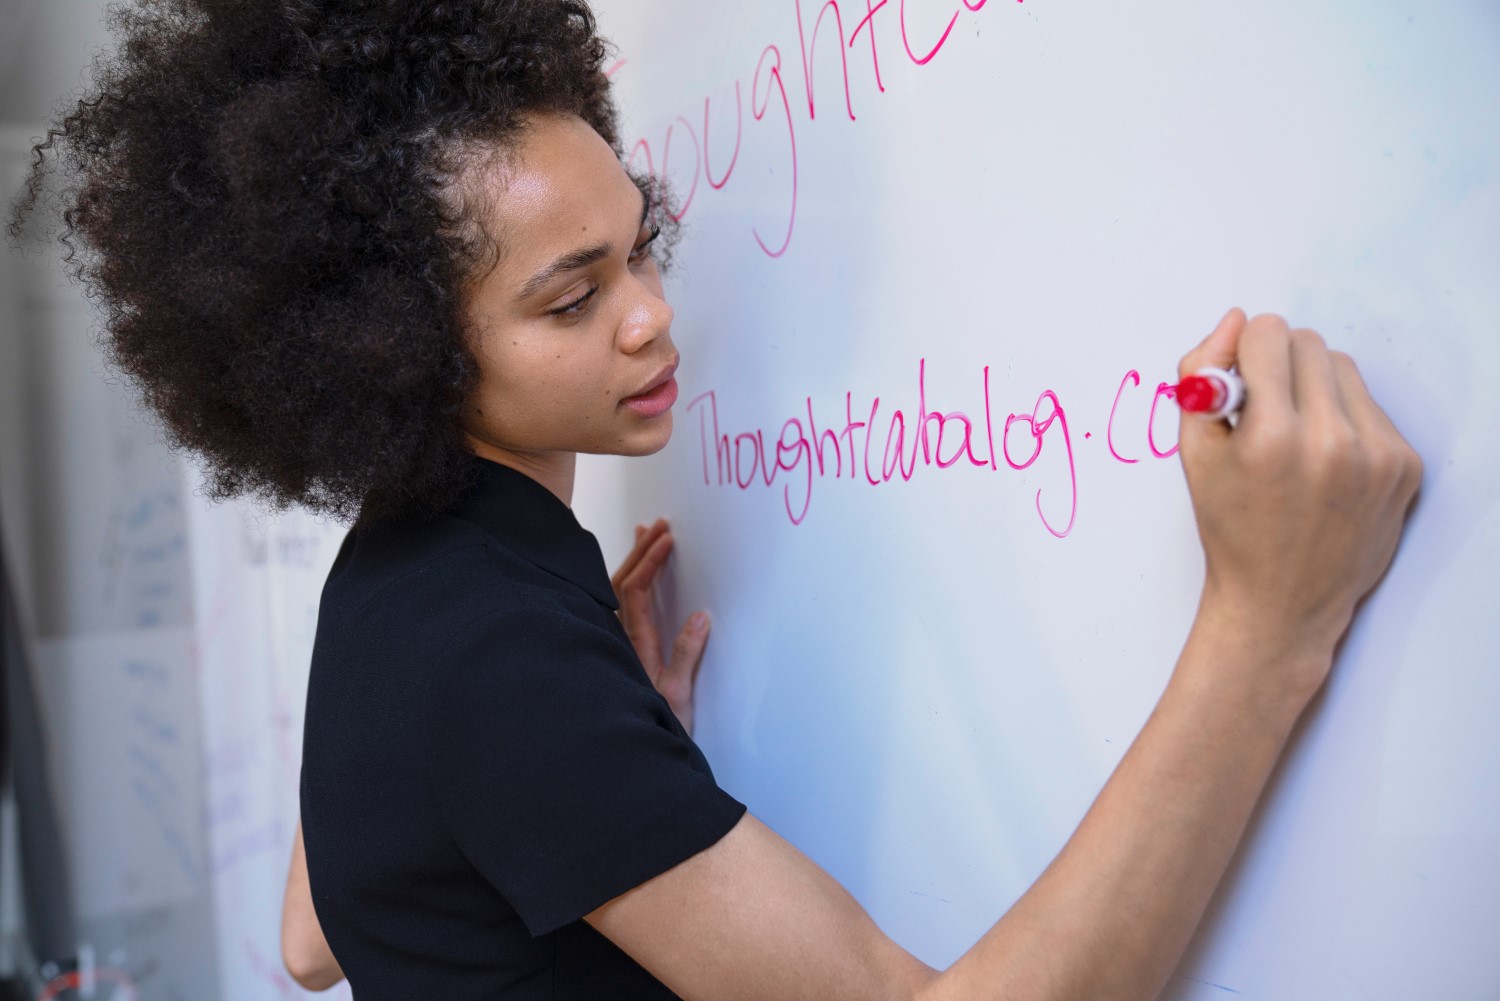 Lady writing on whiteboard in red pen